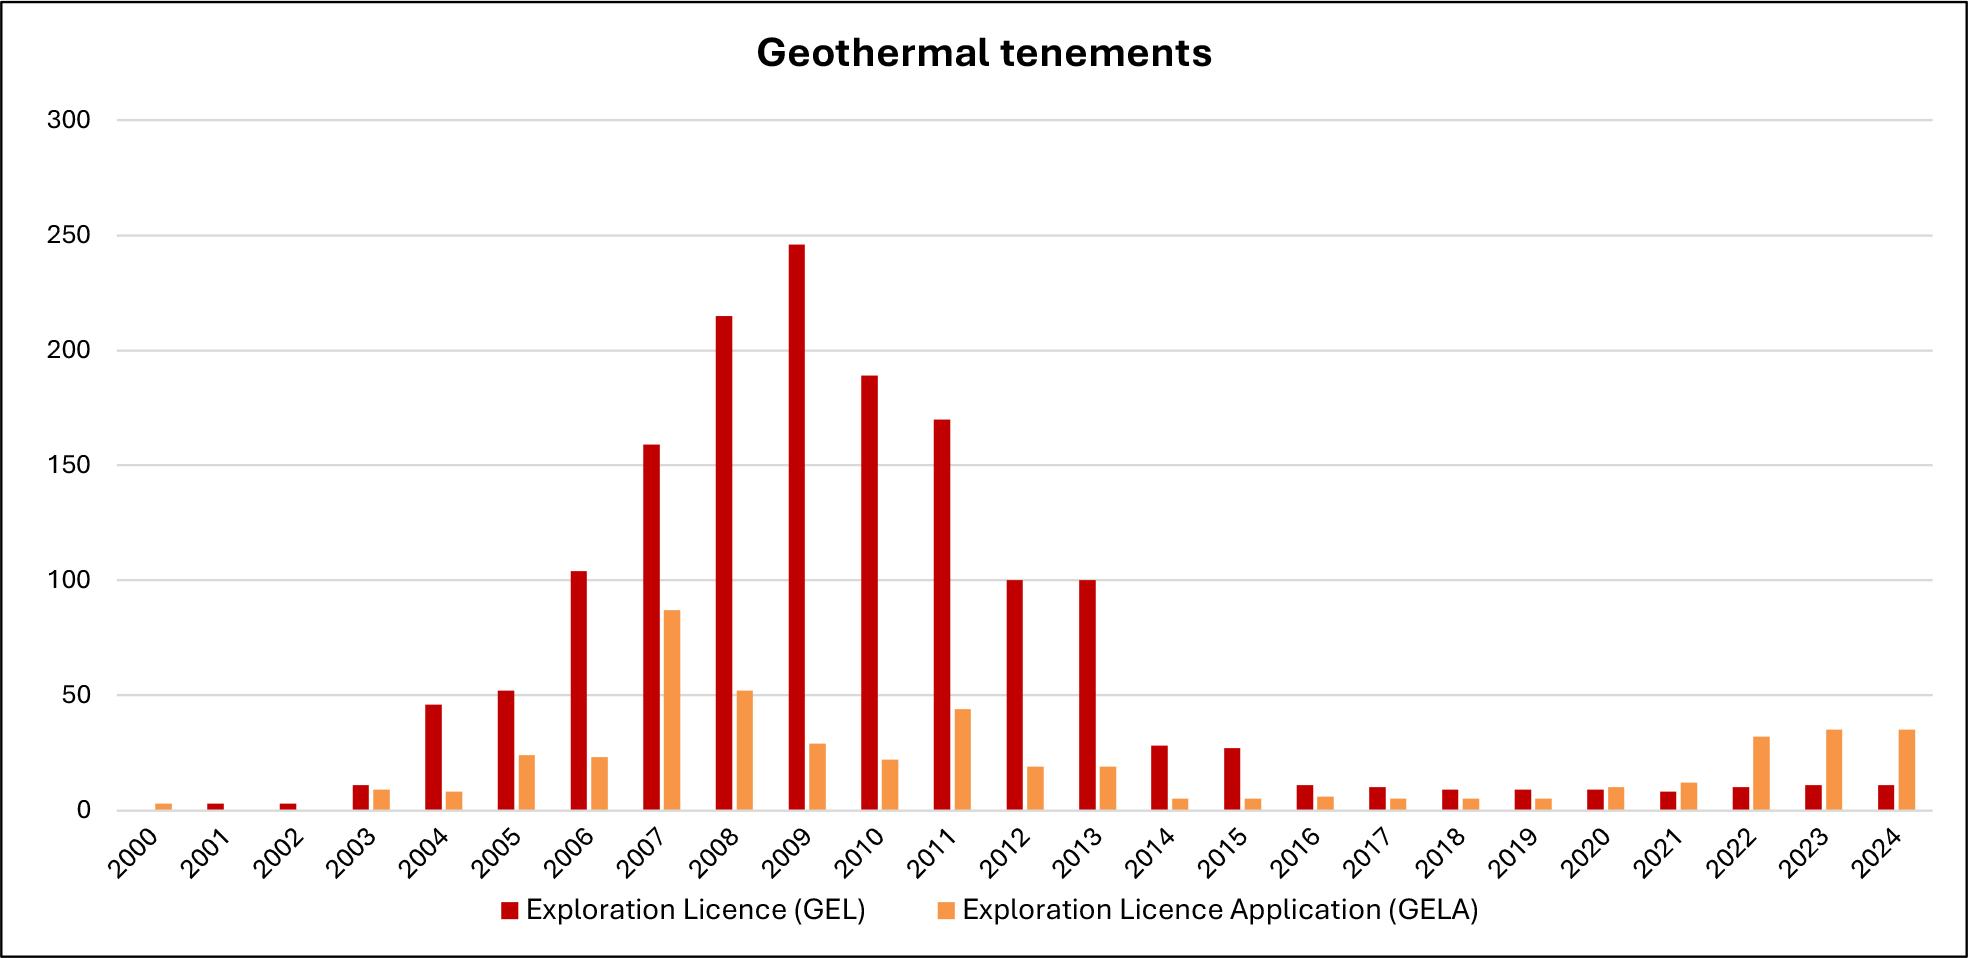 Chart showing geothermal tenement numbers from 2000-2024